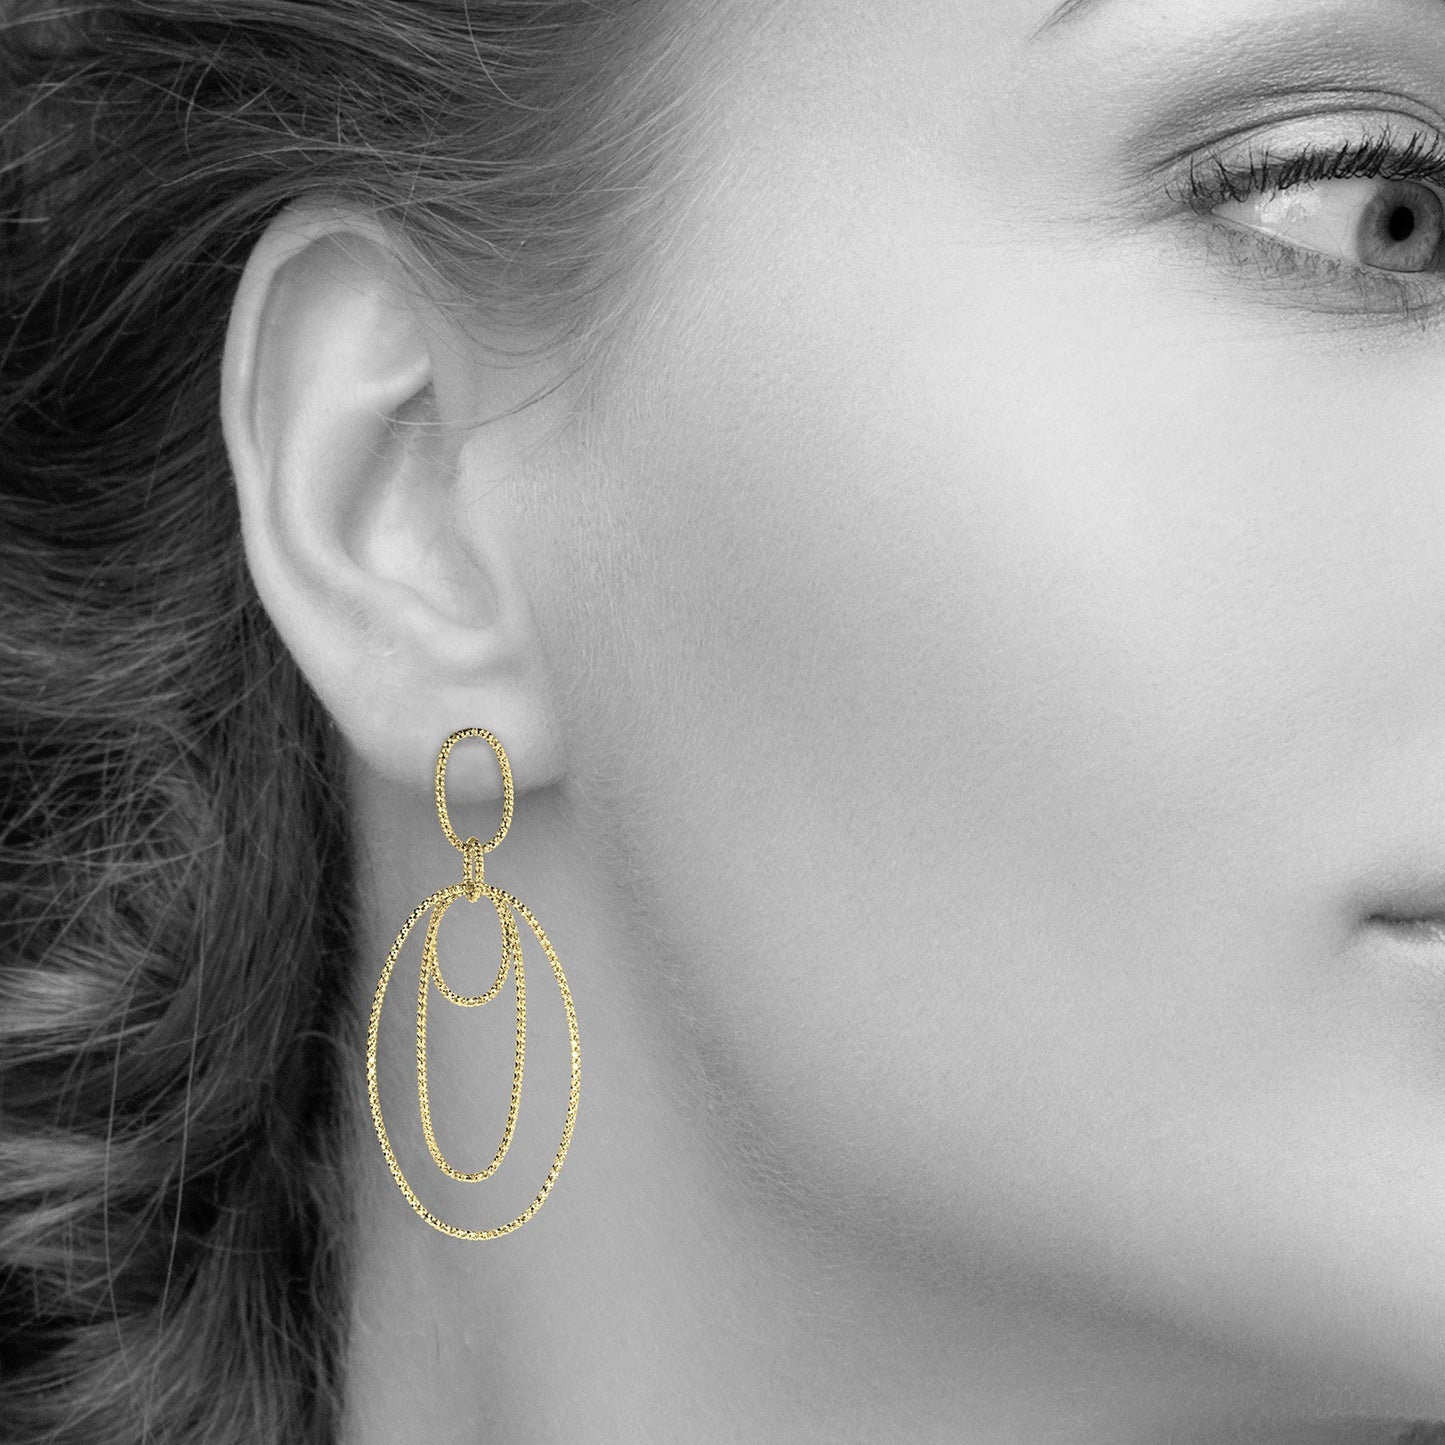 Oval Shaped Drop Earrings in Yellow Gold Plated Sterling Silver